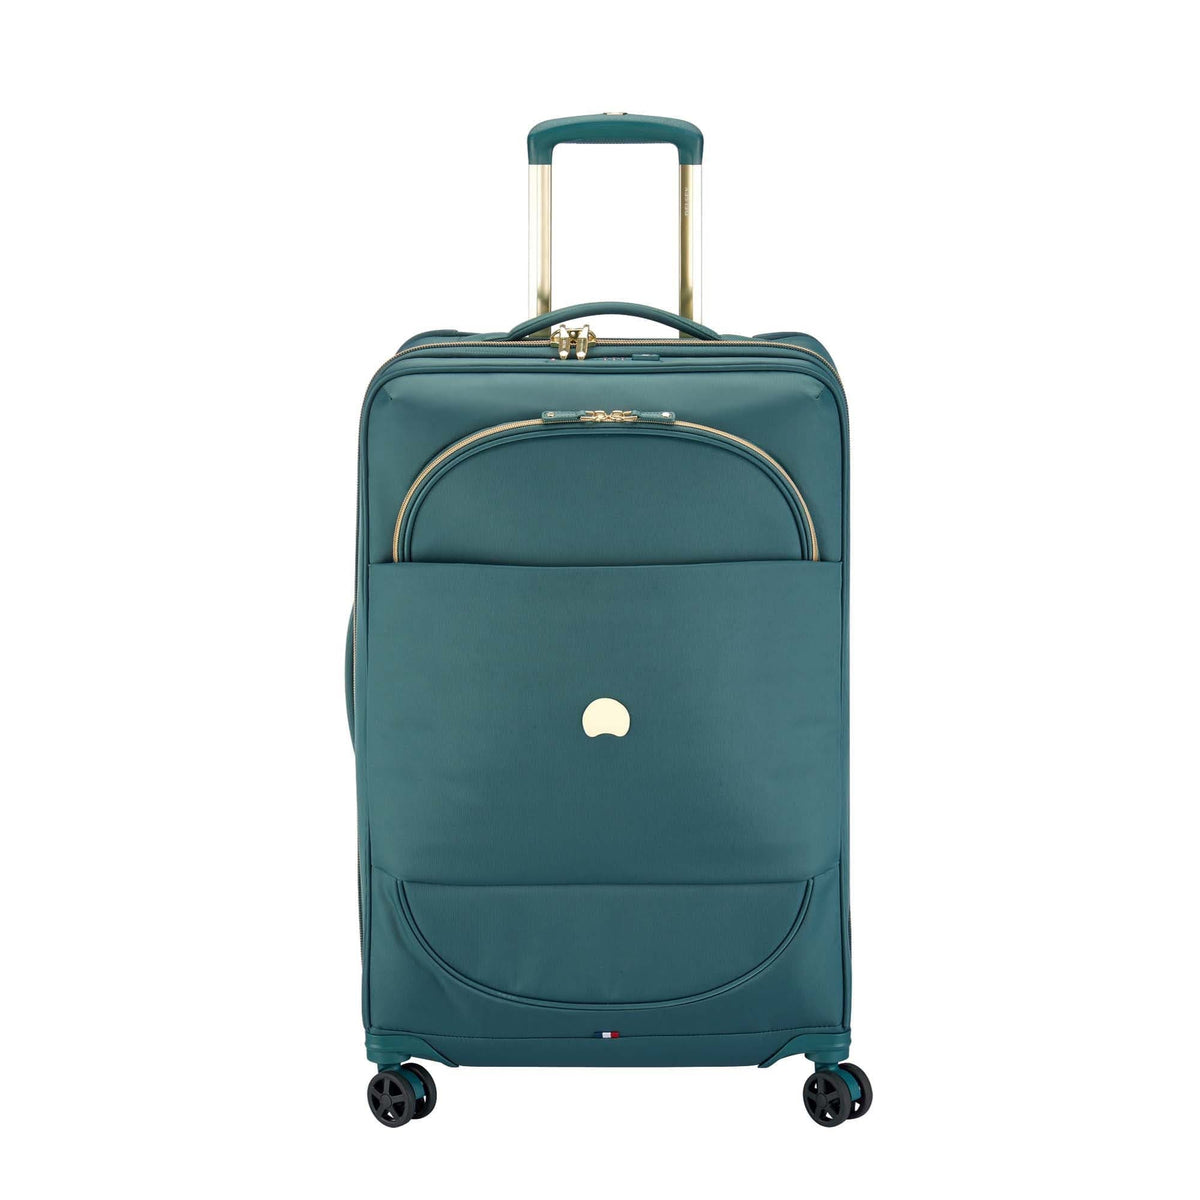 Delsey Montrouge 25" Expandable Upright Spinner